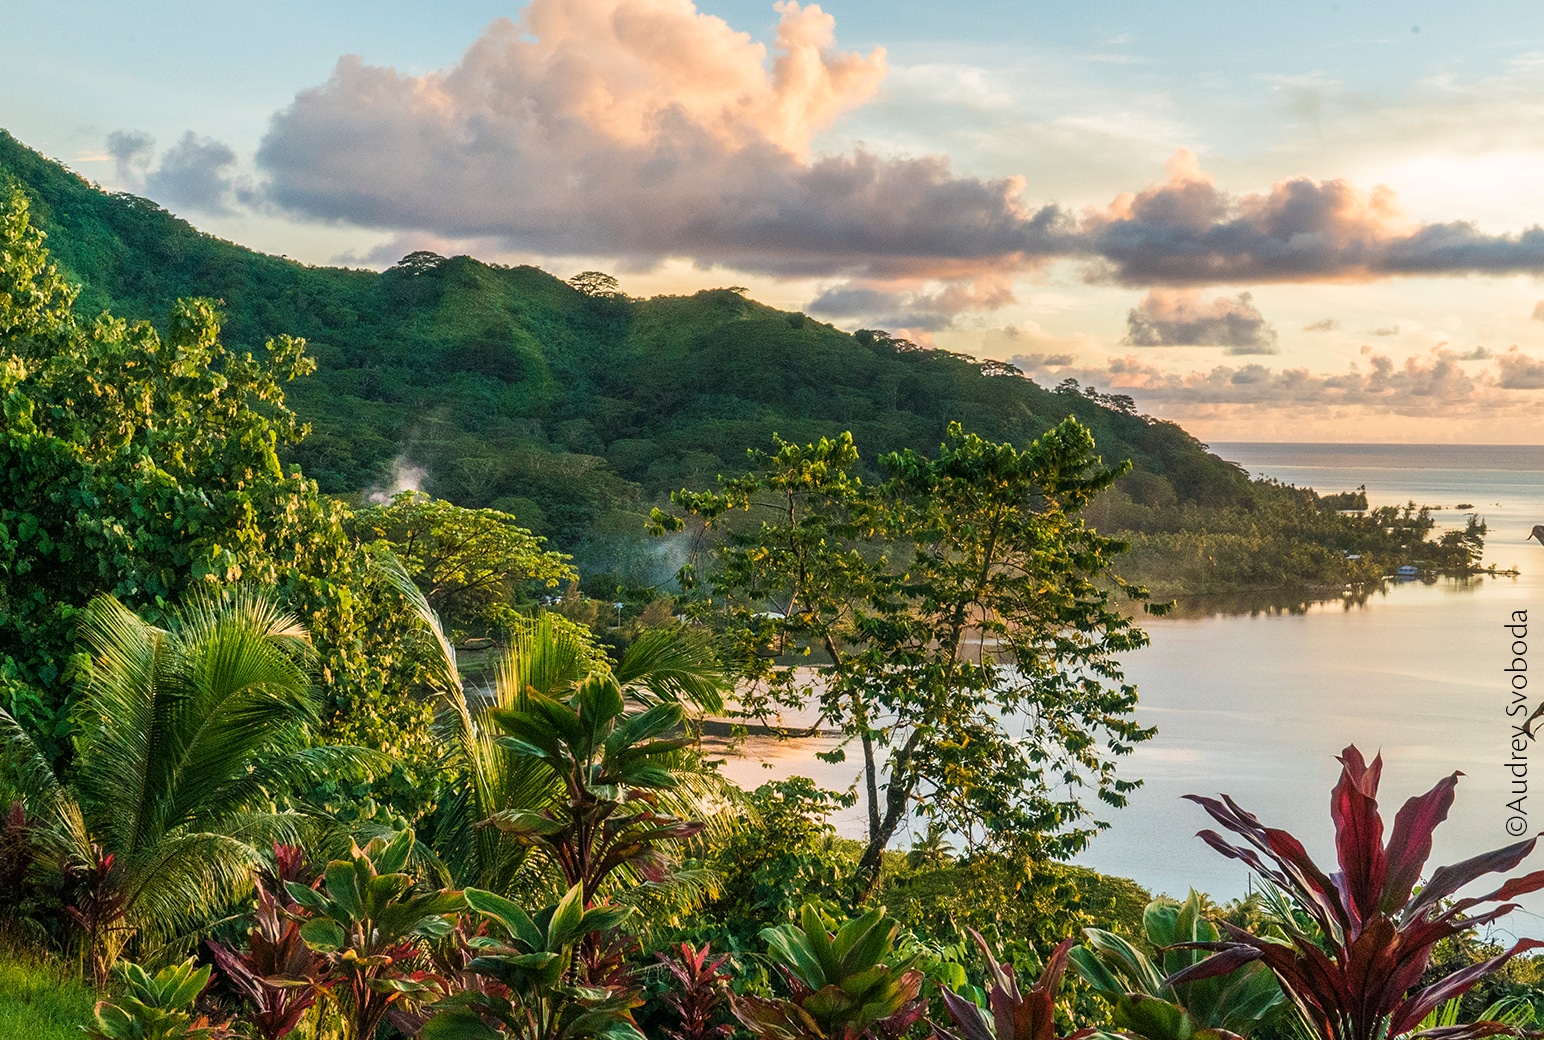 A setting sun casts a soft glow over the green rainforest, pearlescent sands, and shimmering blue waters of Raiatea.